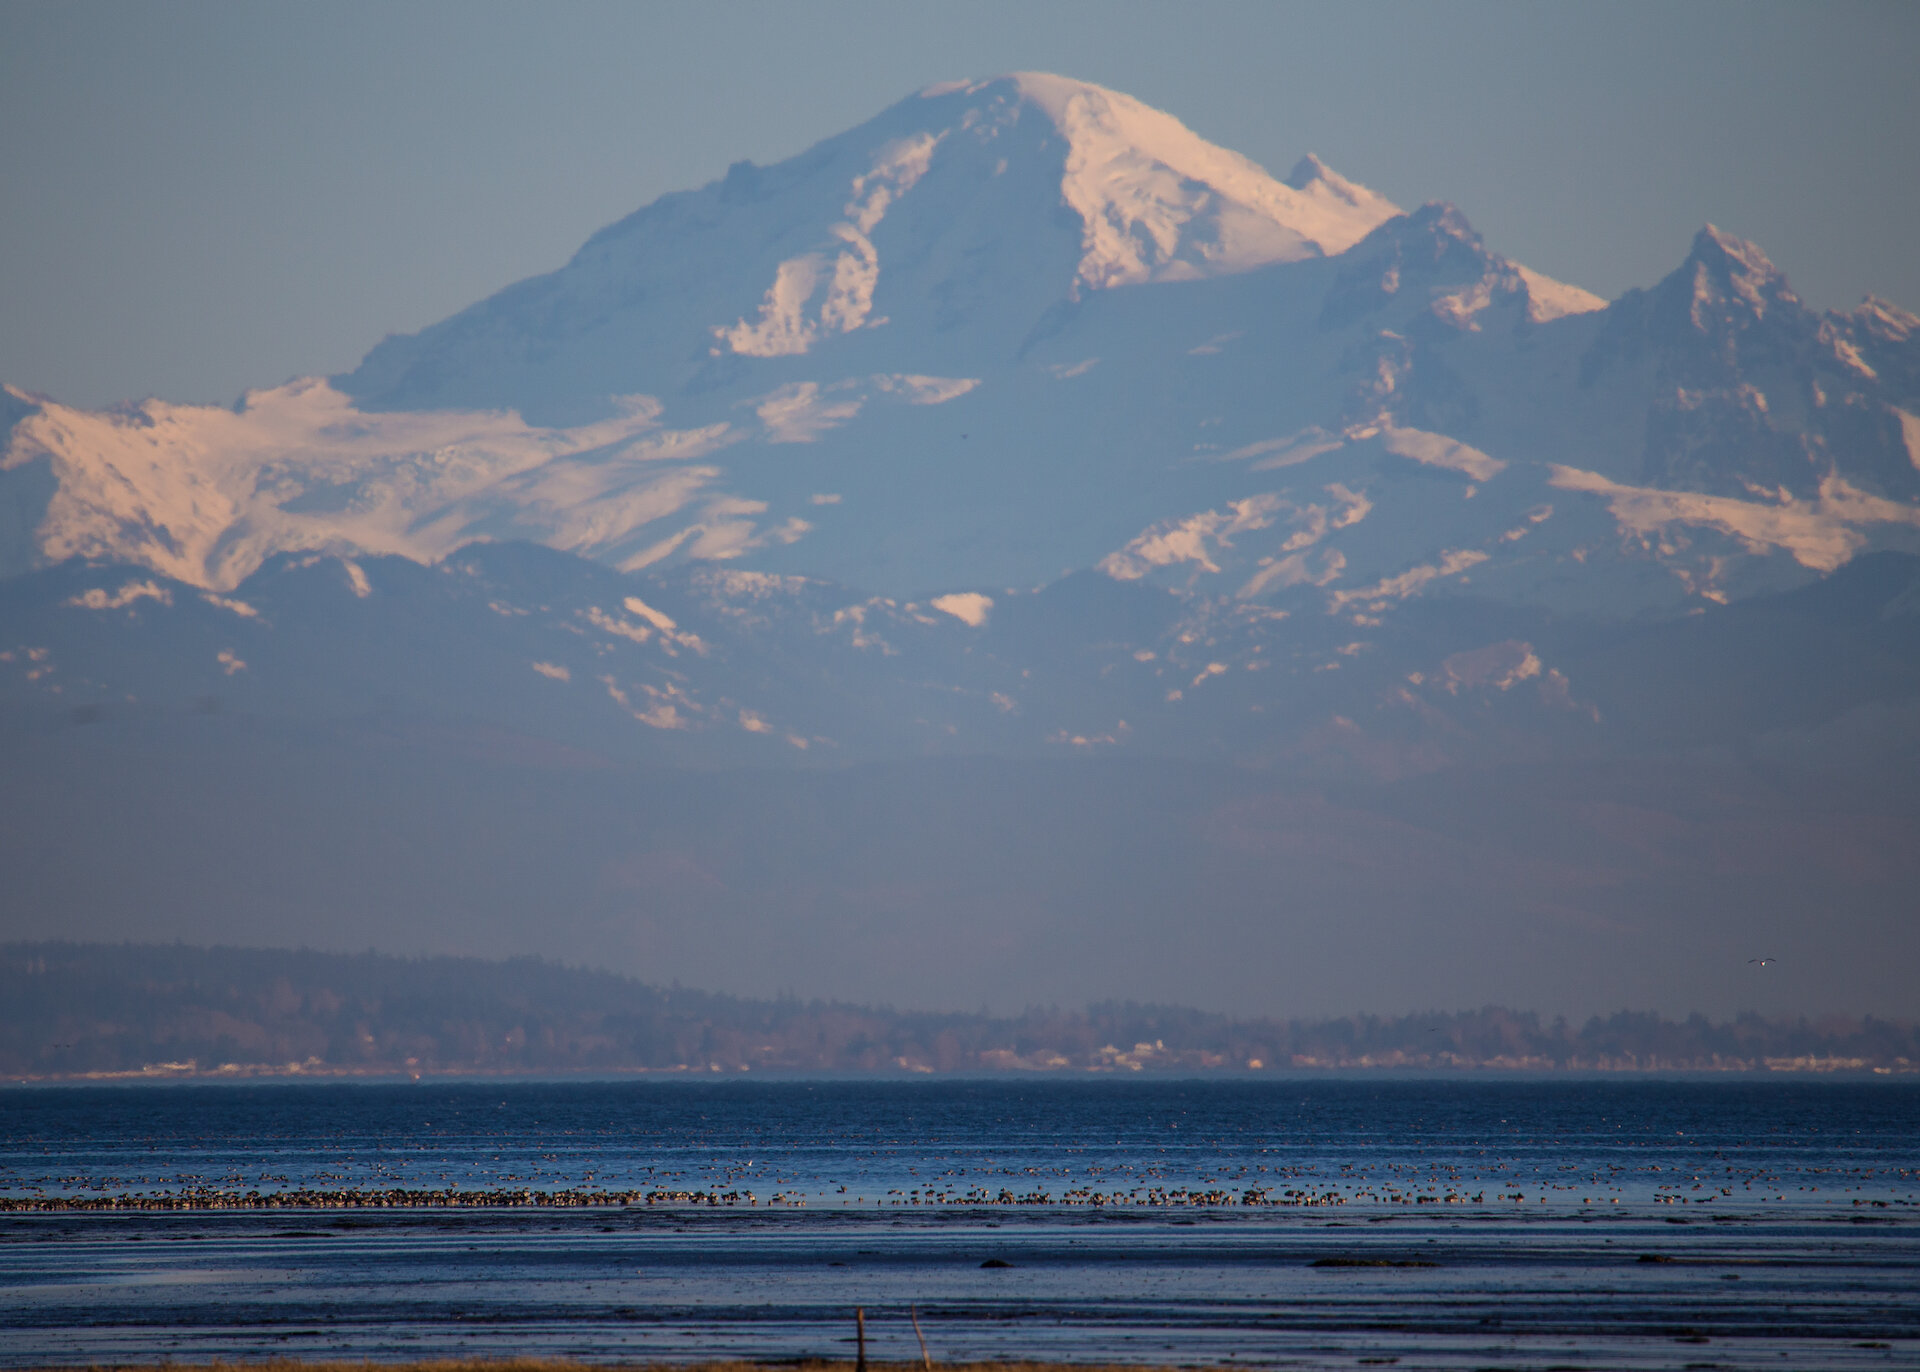  I thought I’d start with some landscapes - the views of Mount Baker were amazing. 